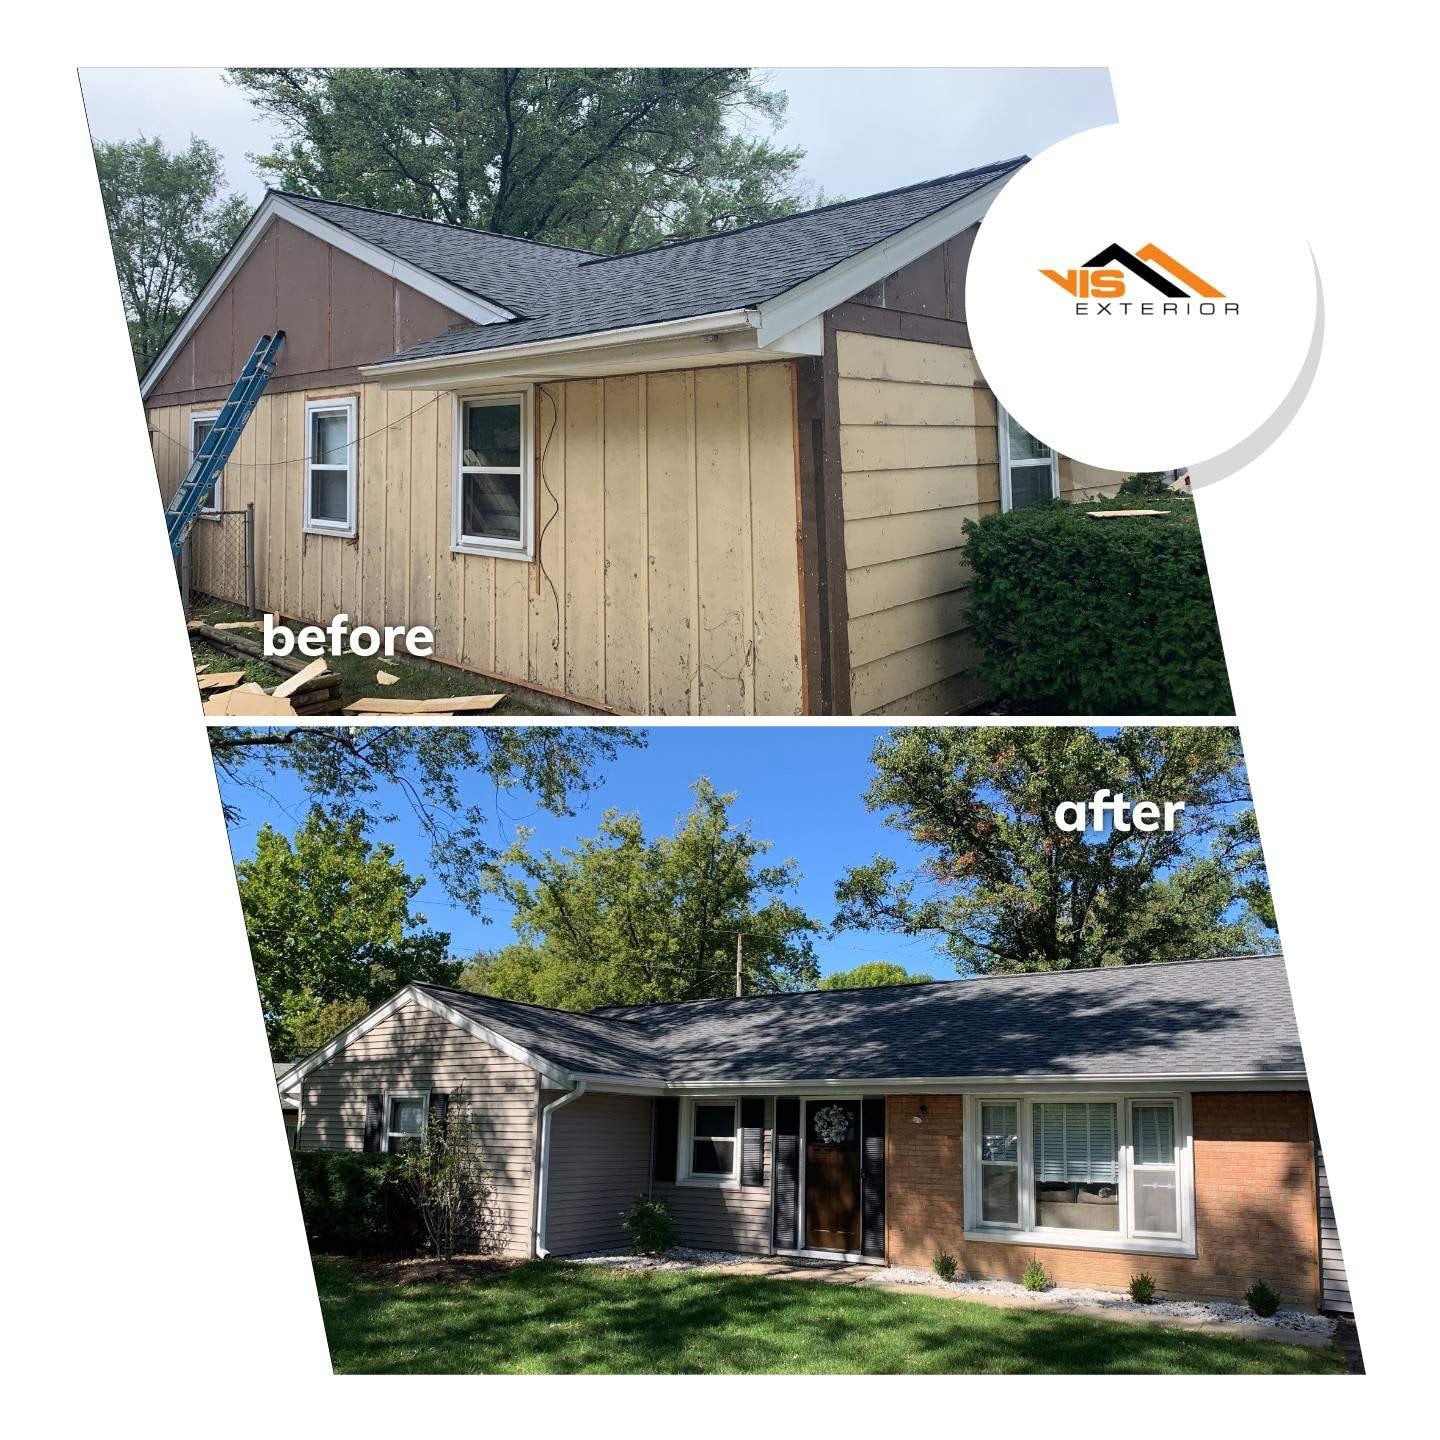 Royal Estate siding installation and shingle roof replacement in Darien before after project photo